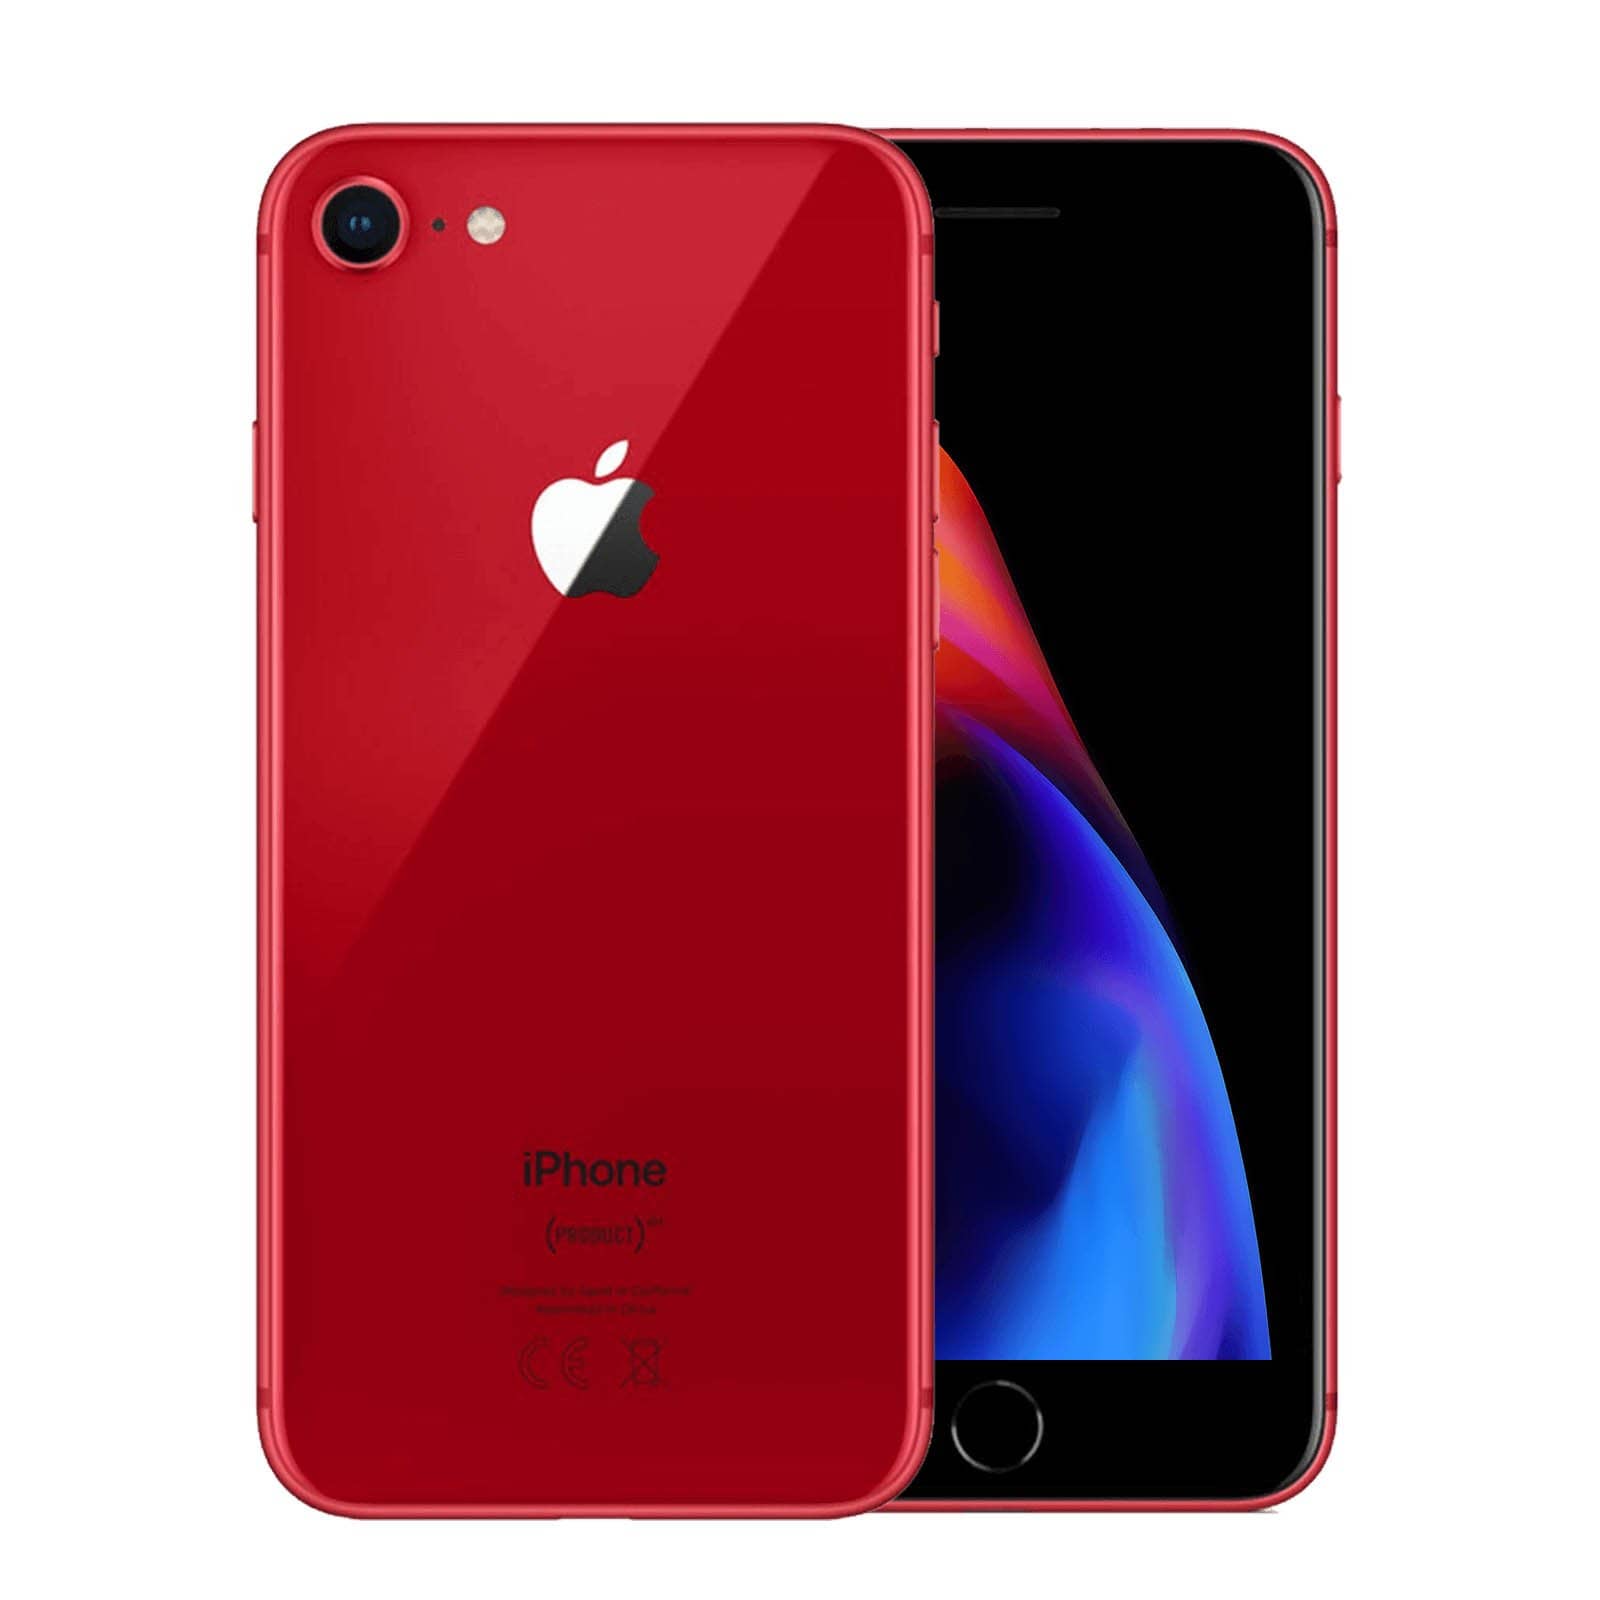 Apple iPhone 8 64GB Product Red Very Good - Unlocked 64GB Product Red Very Good